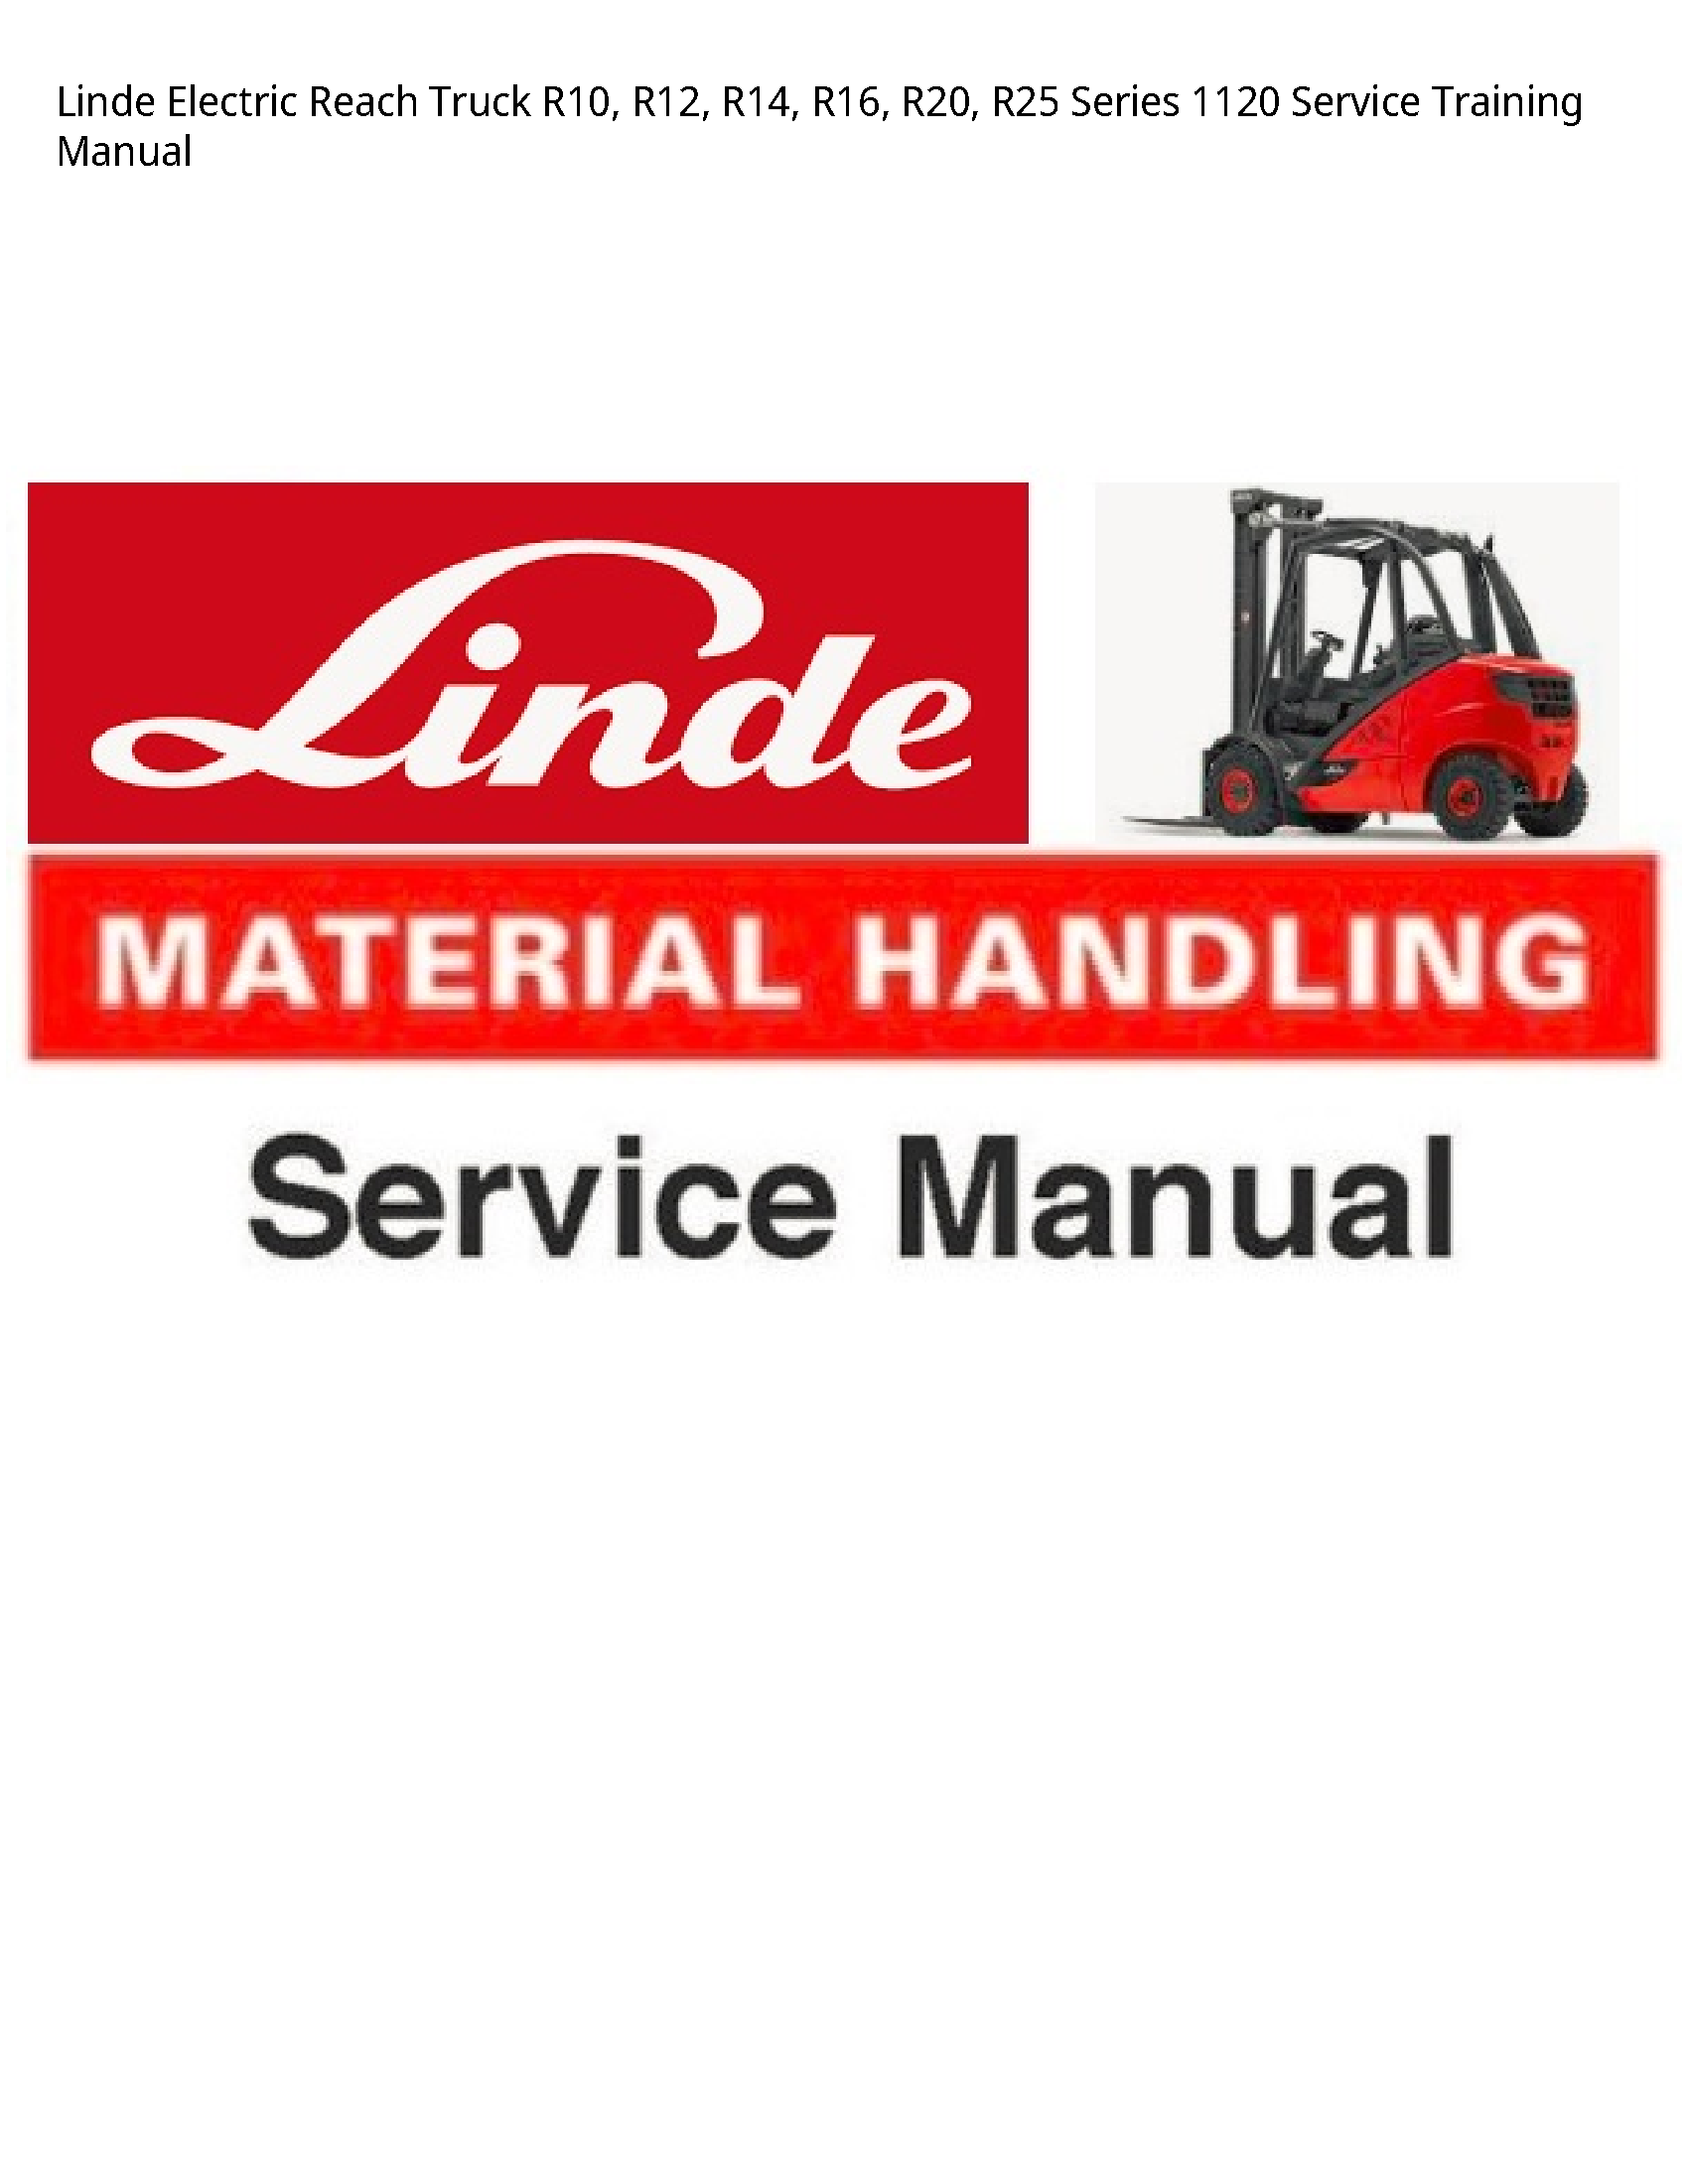 Linde R10 Electric Reach Truck Series Service Training manual